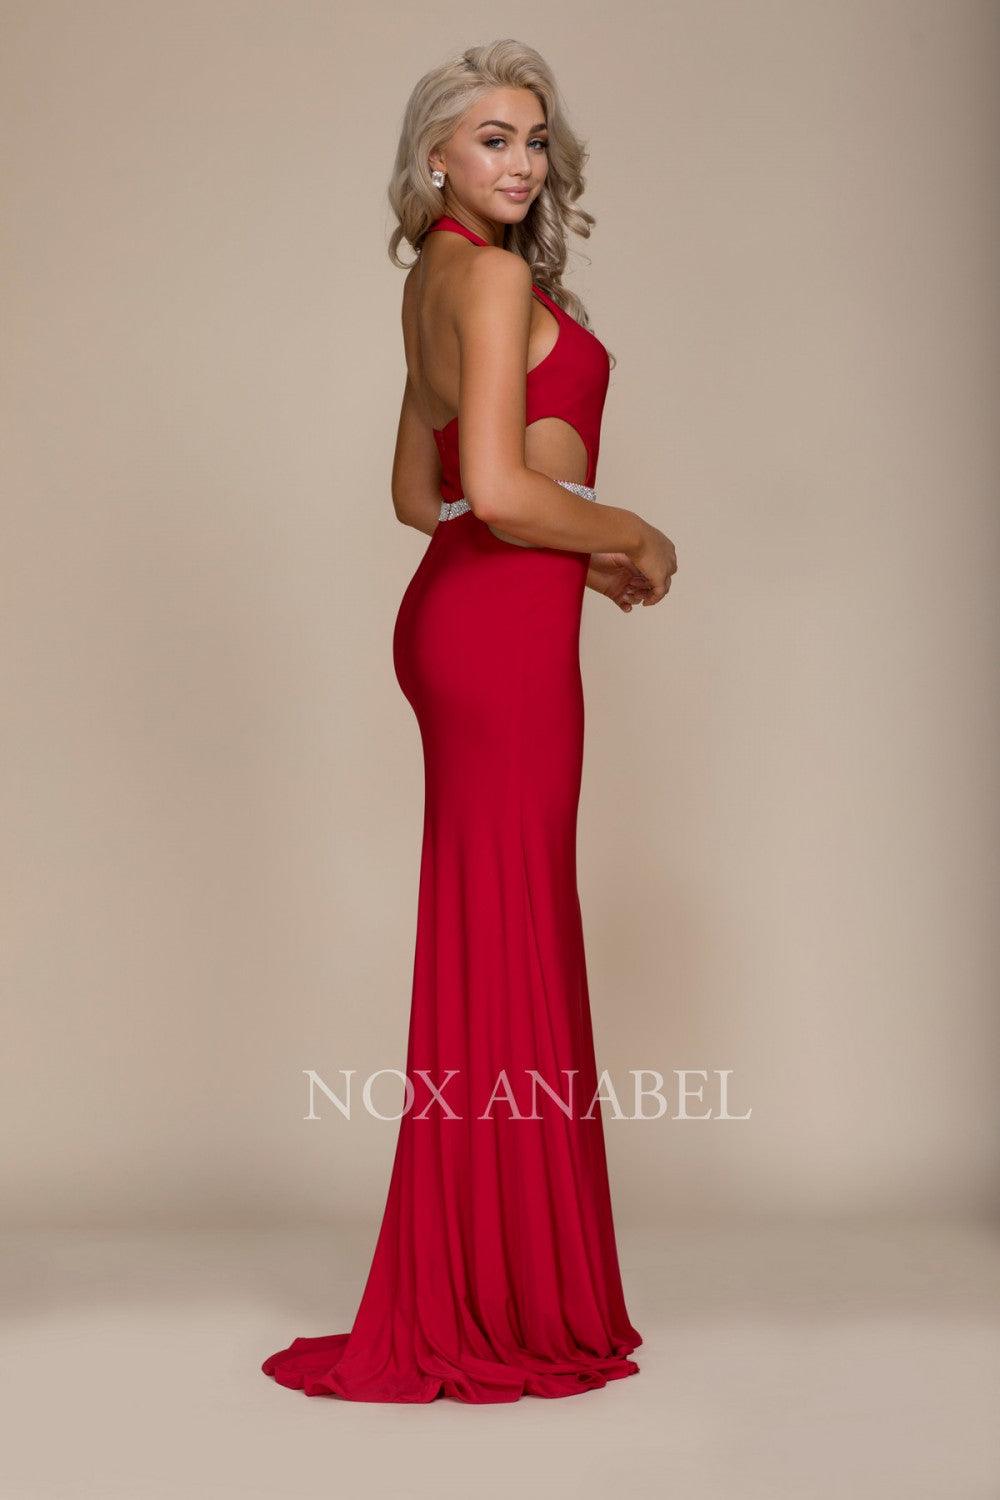 Long Sexy Cutout Prom Dress Evening Gown - The Dress Outlet Nox Anabel